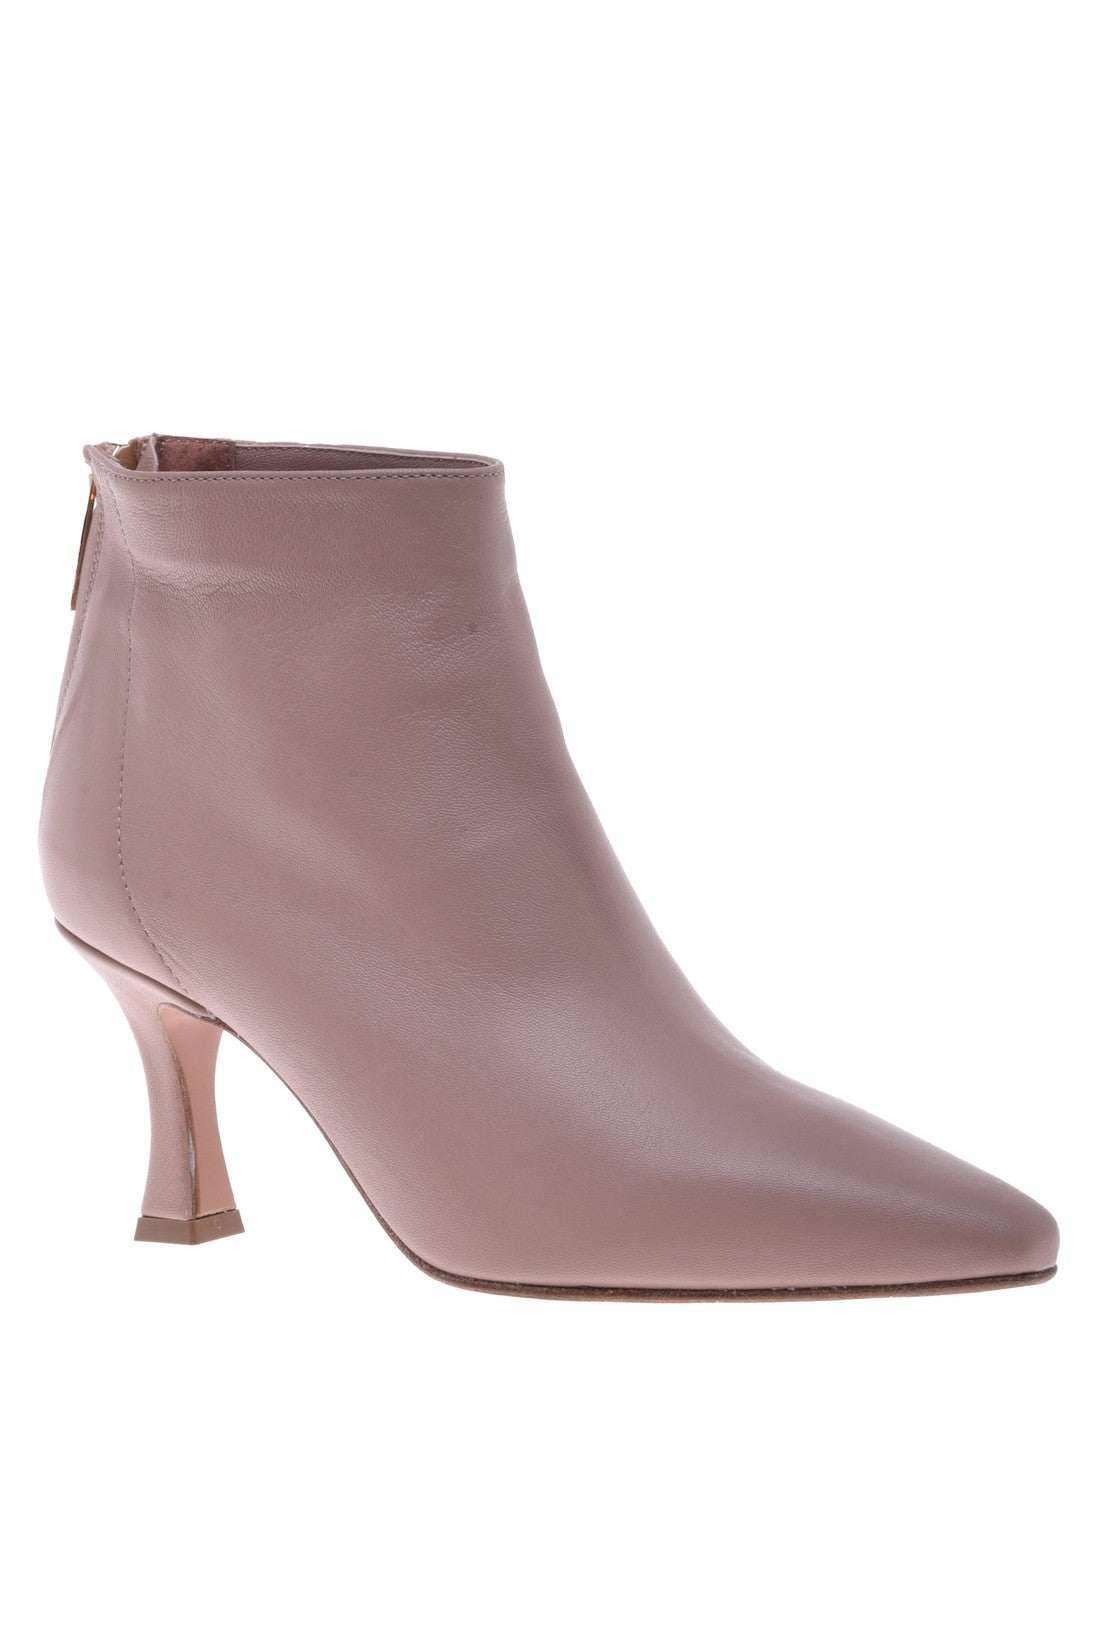 Ankle boot in nude nappa leather